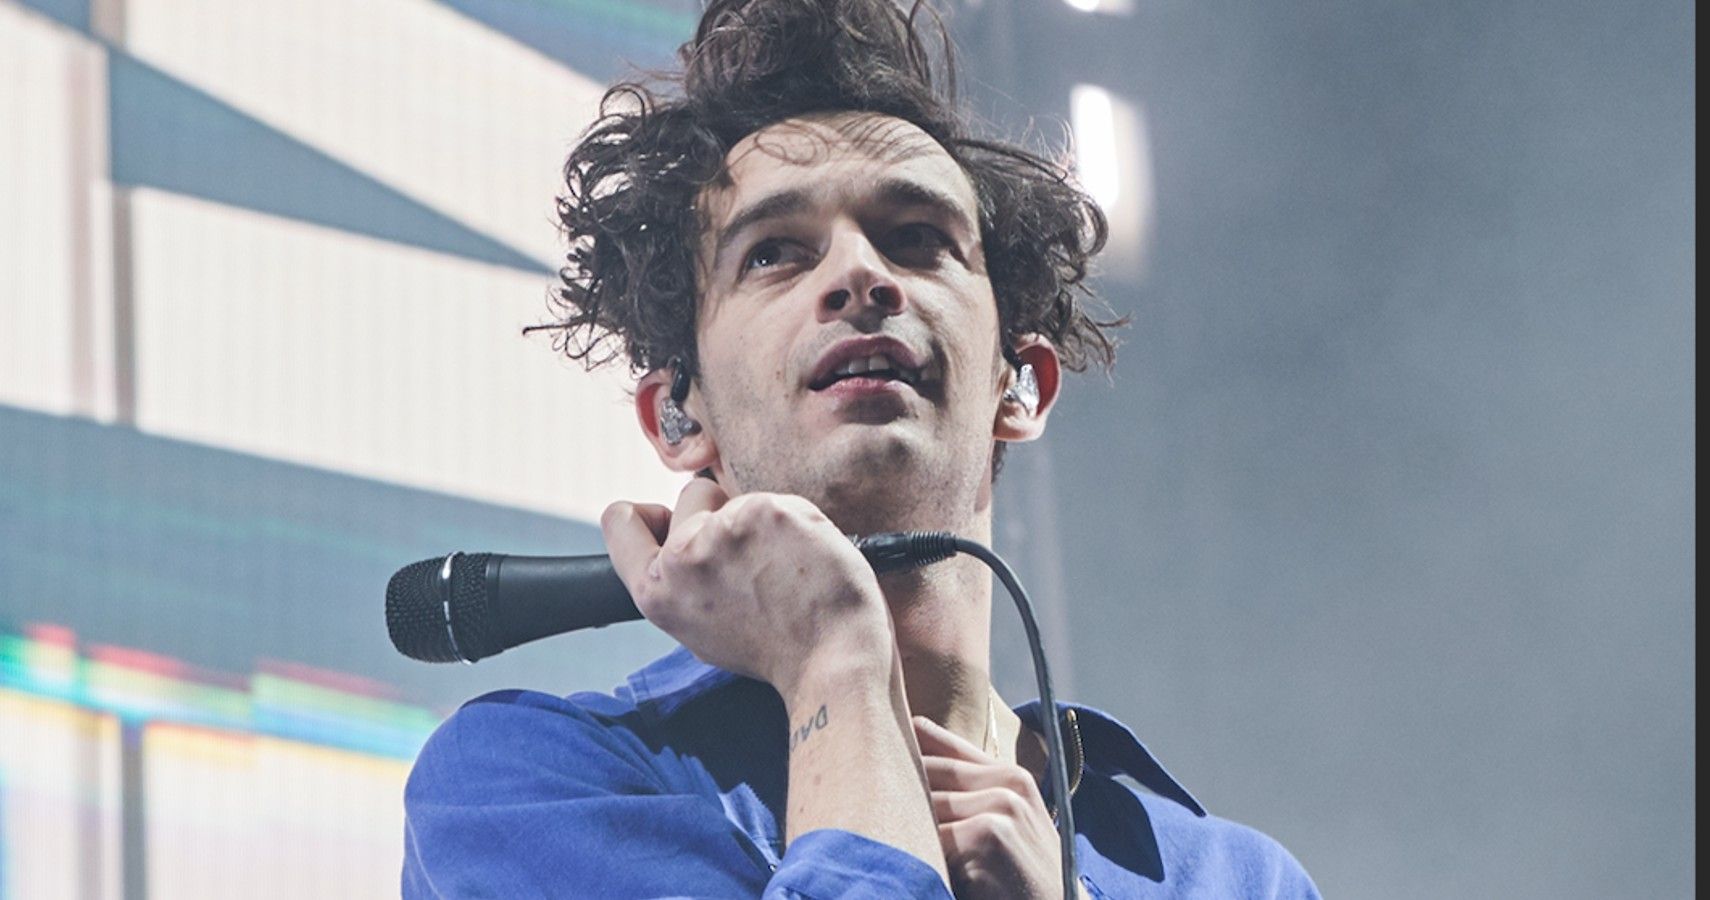 Matty Healy performing with the 1975 